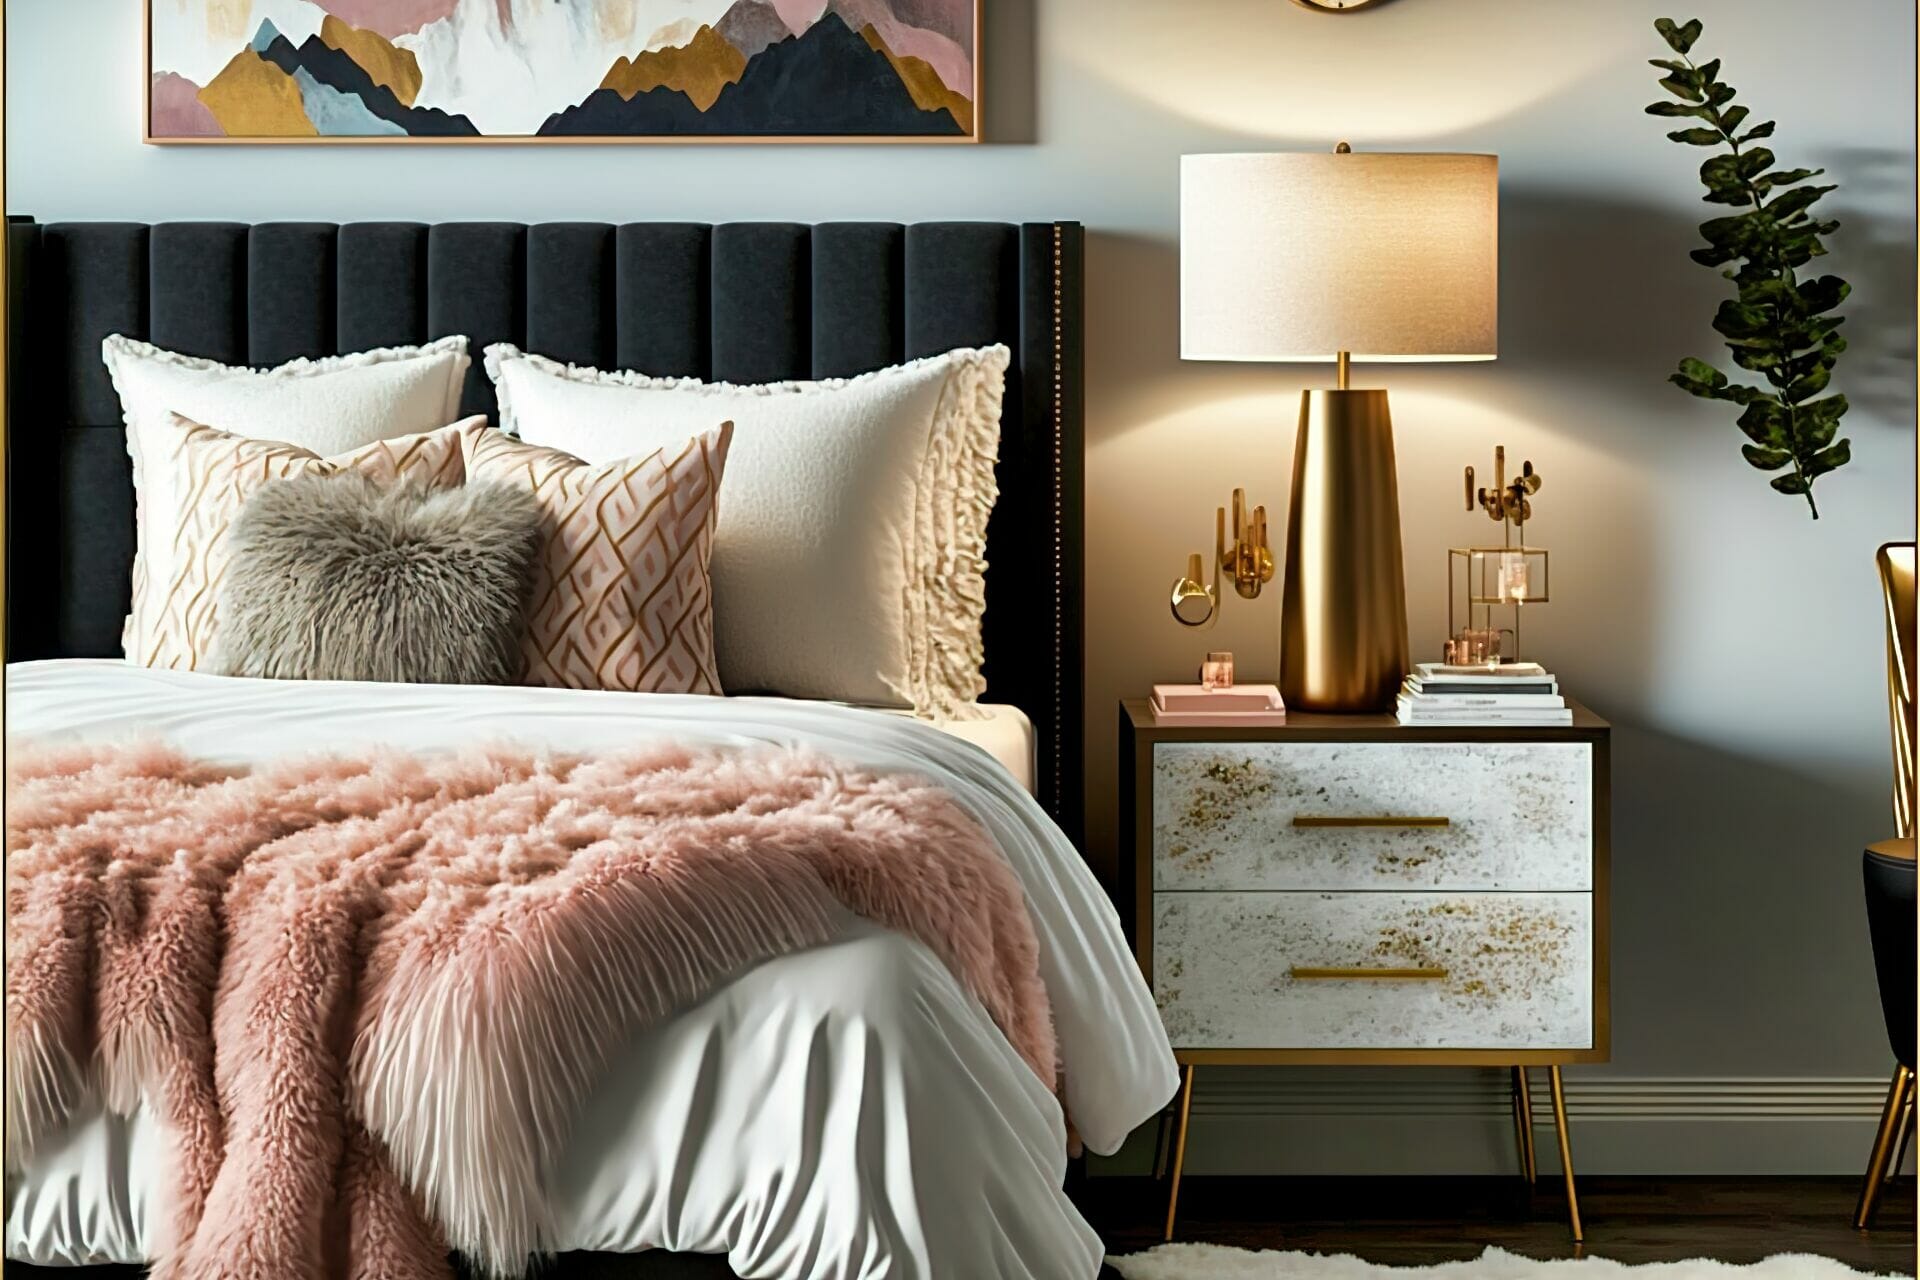 A Scandinavian Style Bedroom With Gold And Blush Accents – This Bedroom Is Decorated With A Mix Of Colors And Textures For A Unique And Elegant Look. The Walls Are A Soft Blush Color, While The Bed Frame And Nightstand Are A Dark Wood. To Complete The Look, A White Fur Rug Lies On The Floor, And Art Prints With Gold And Blush Colors Hang On The Walls.